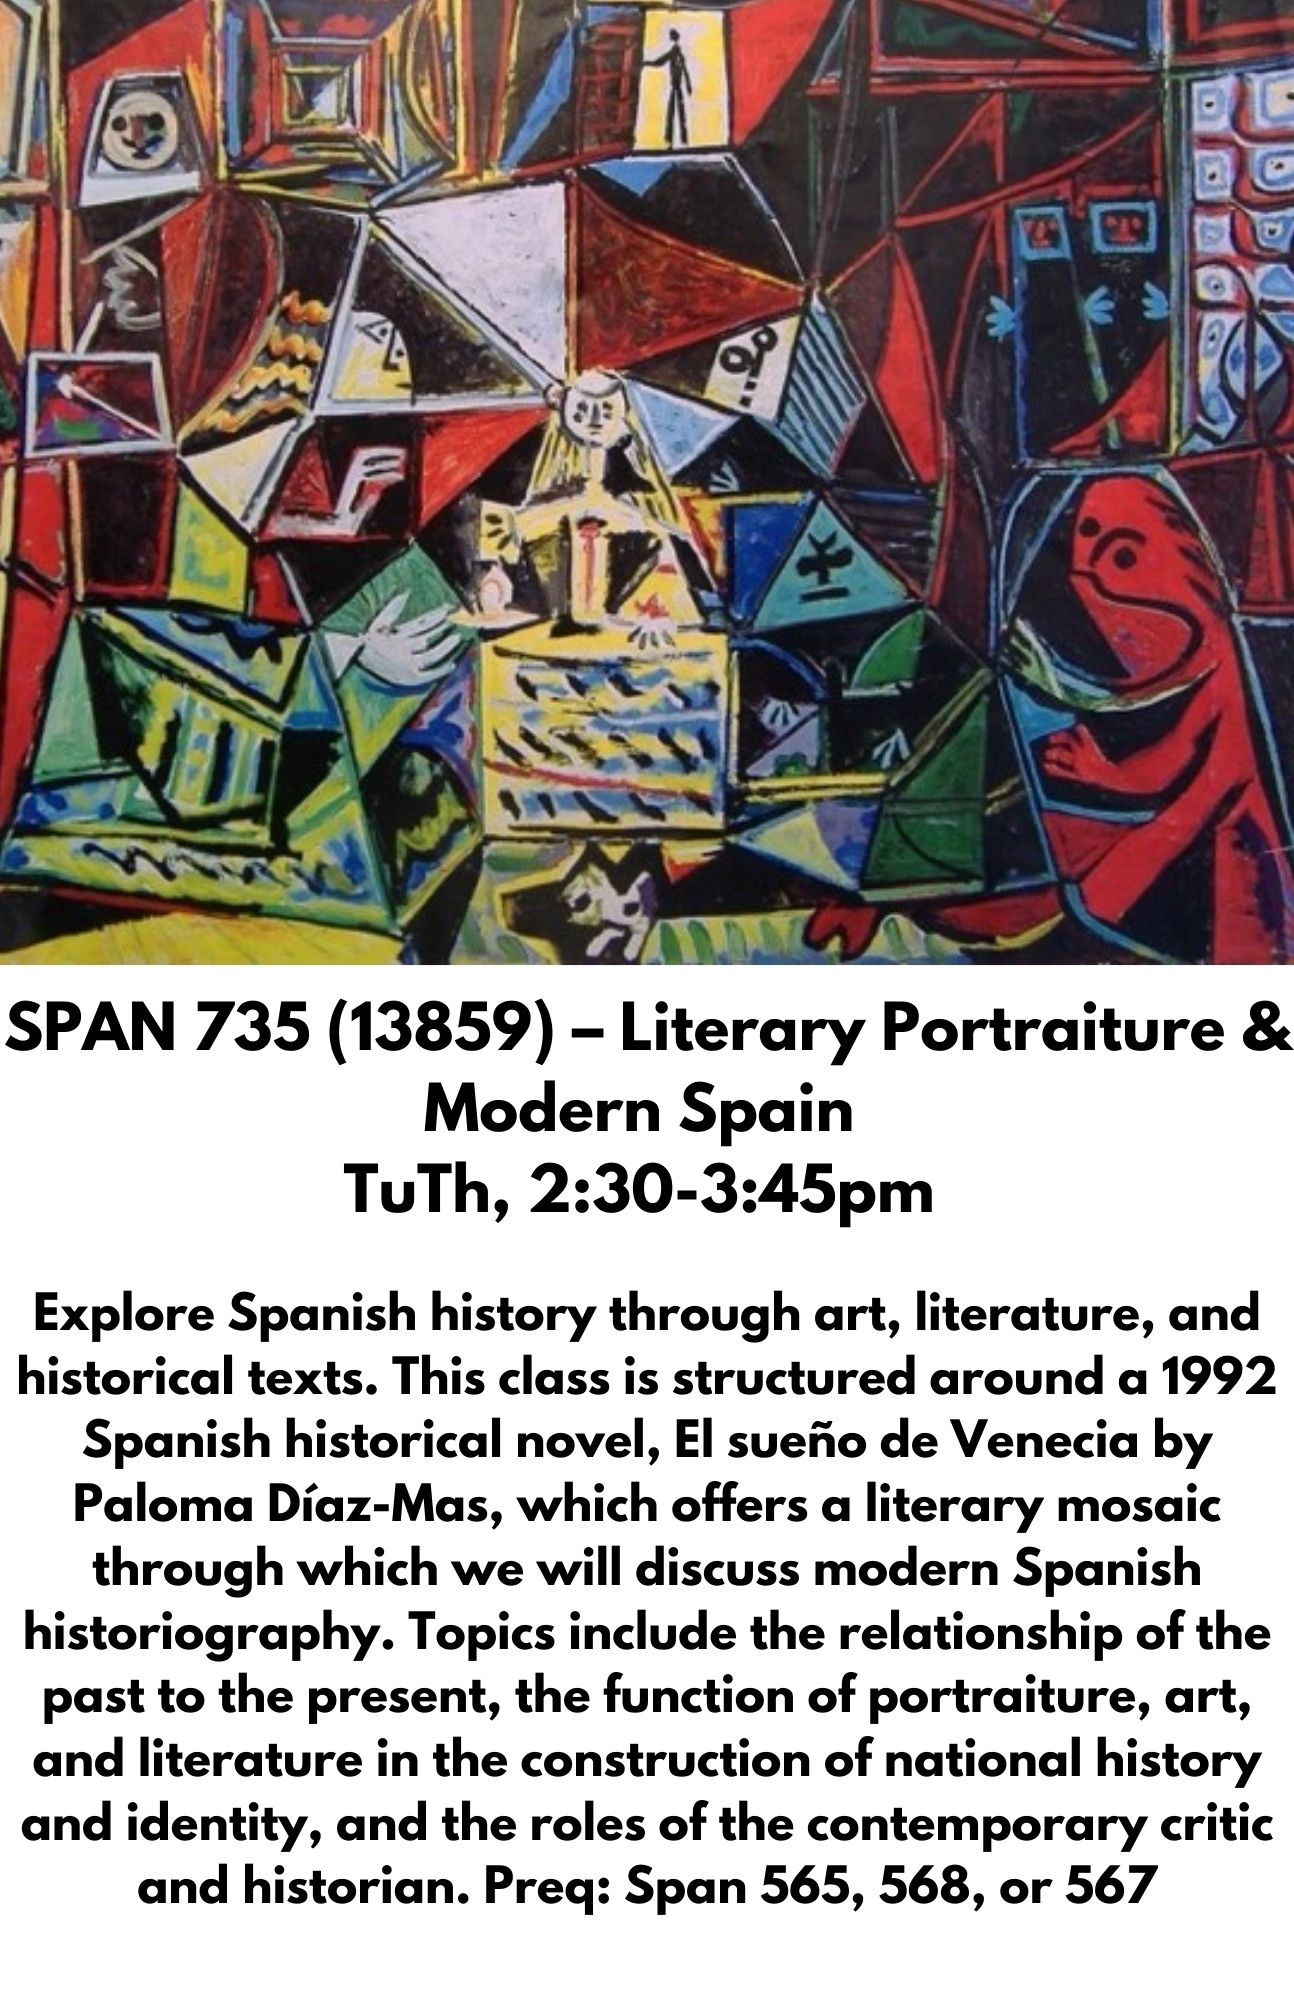 SPAN 735 (13859) – Literary Portraiture & Modern Spain  TuTh, 2:30-3:45pm   Explore Spanish history through art, literature, and historical texts. This class is structured around a 1992 Spanish historical novel, El sueño de Venecia by Paloma Díaz-Mas, which offers a literary mosaic through which we will discuss modern Spanish historiography. Topics include the relationship of the past to the present, the function of portraiture, art, and literature in the construction of national history and identity, and the roles of the contemporary critic and historian. Preq: Span 565, 568, or 567